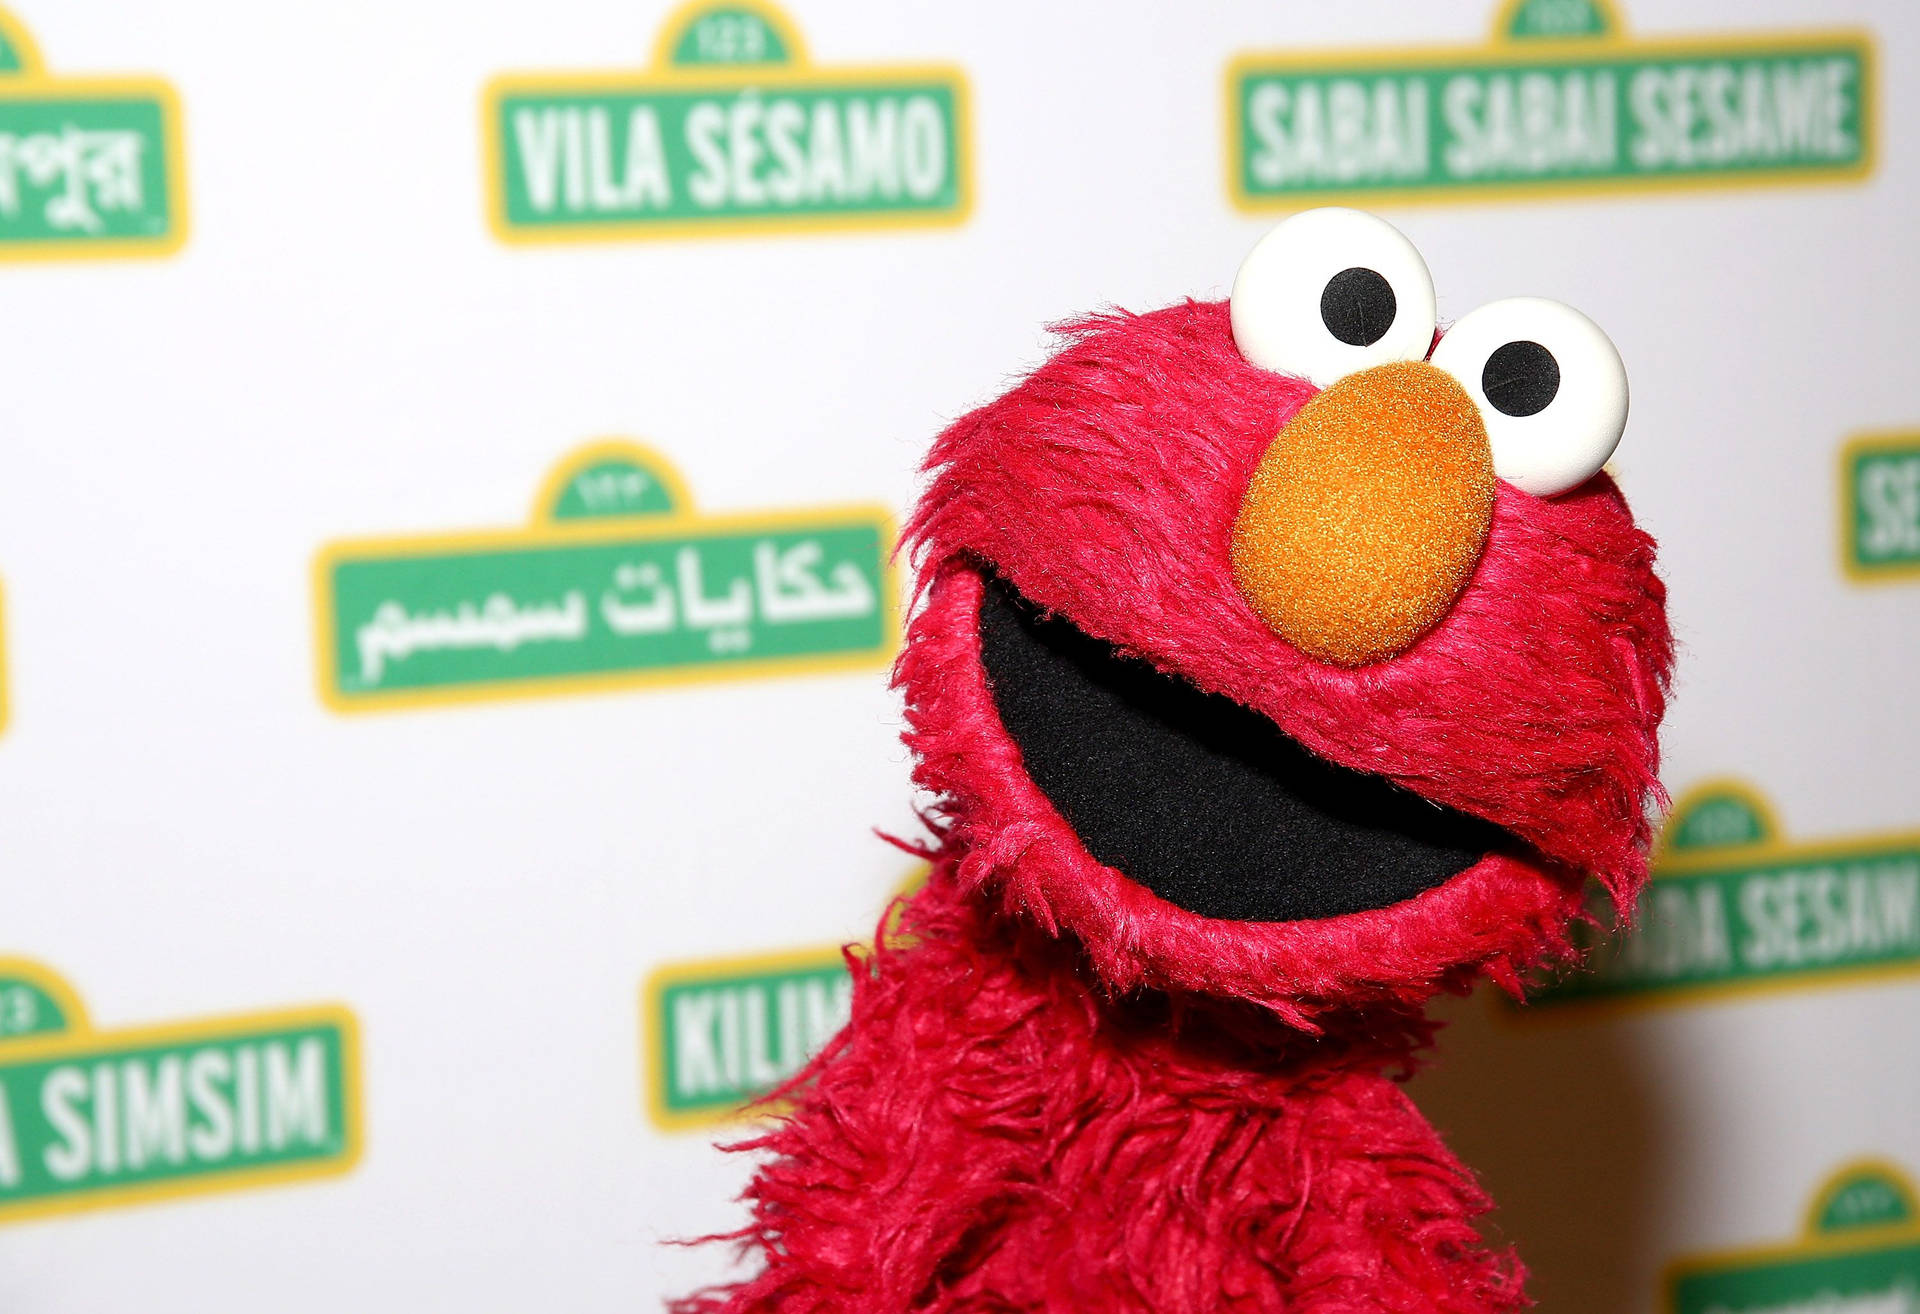 Elmo 3000X2053 Wallpaper and Background Image